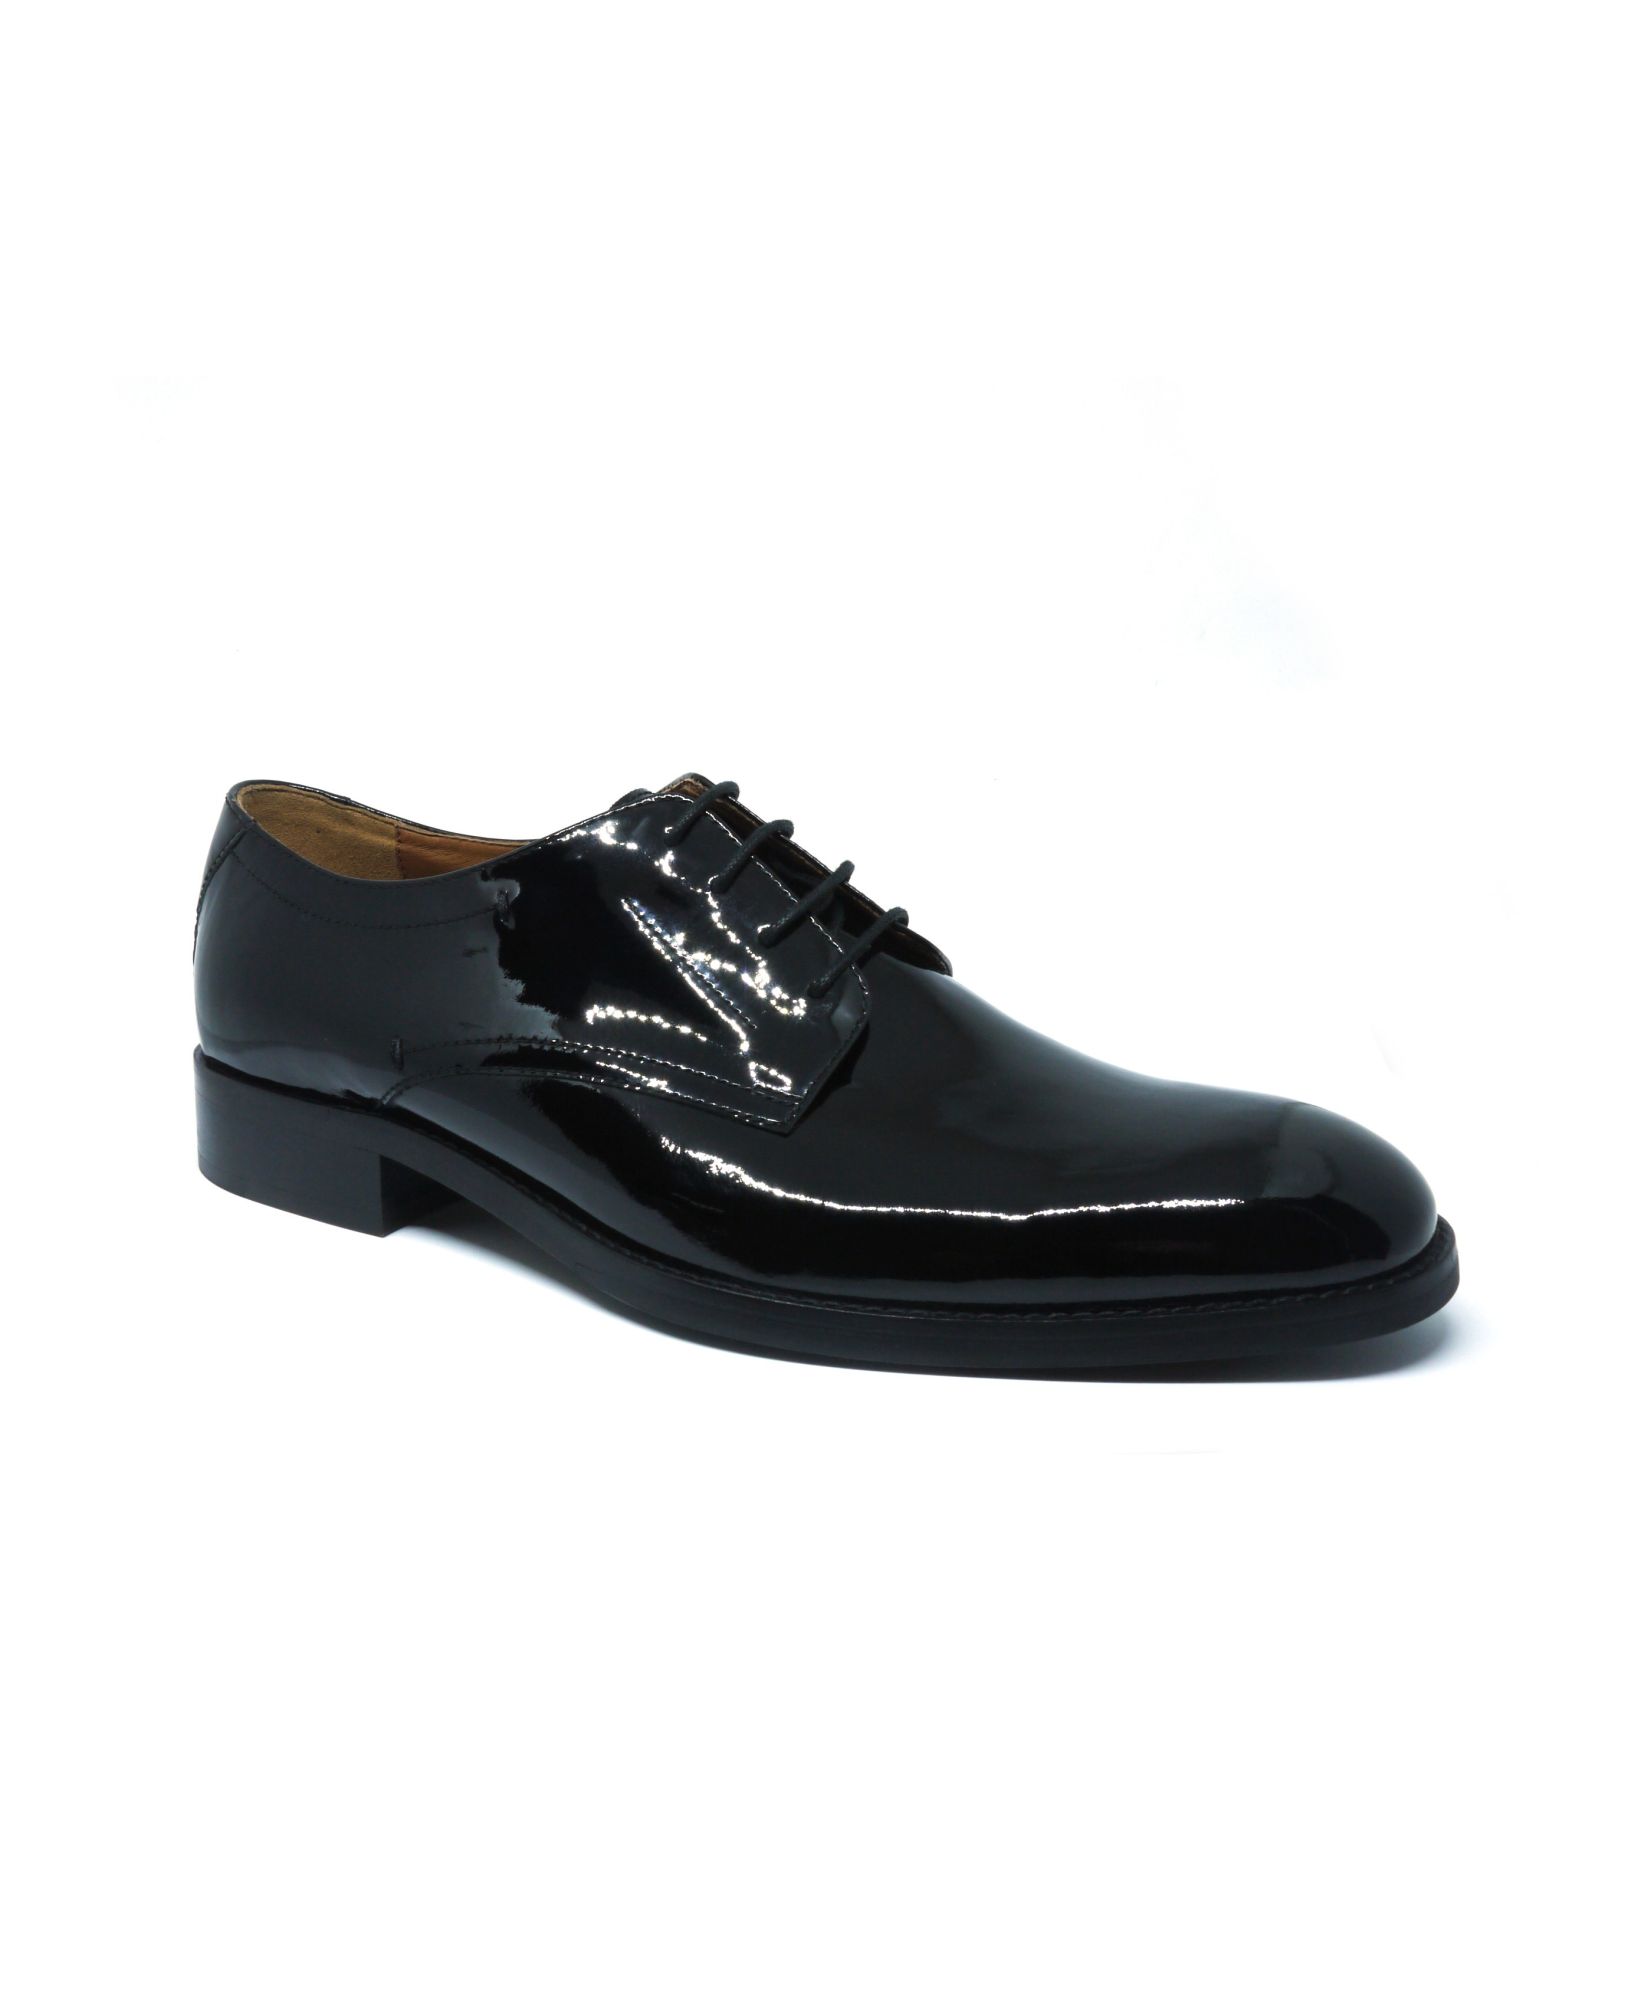 Black Patent Leather Derby Shoes 10